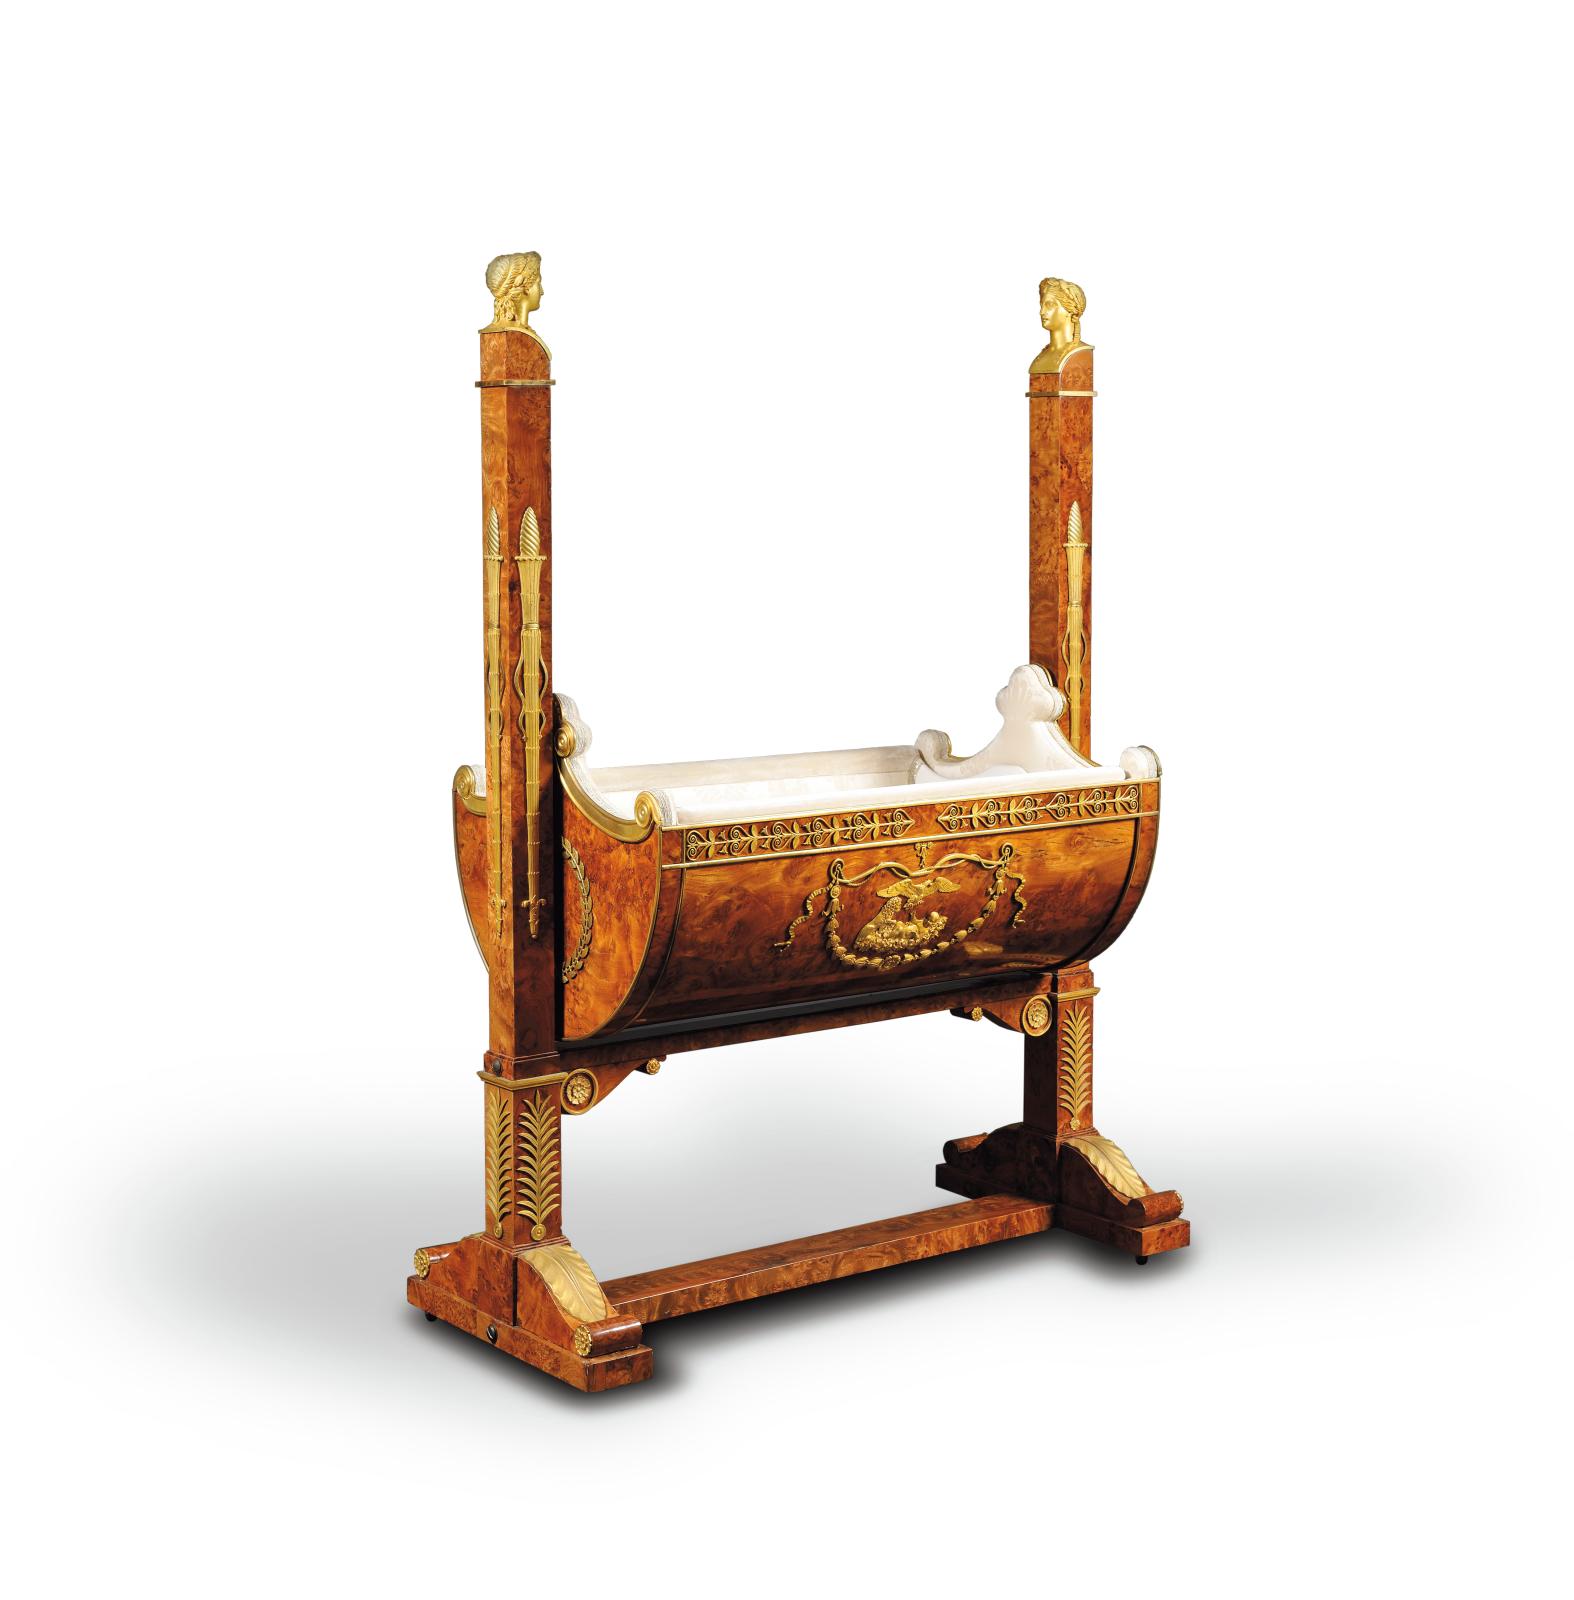 €257,600F.-H.-G. Jacob-Desmalter, after drawings by C. Percier., rocking cradle in elm burr veneer richly decorated with chased gilt bronz